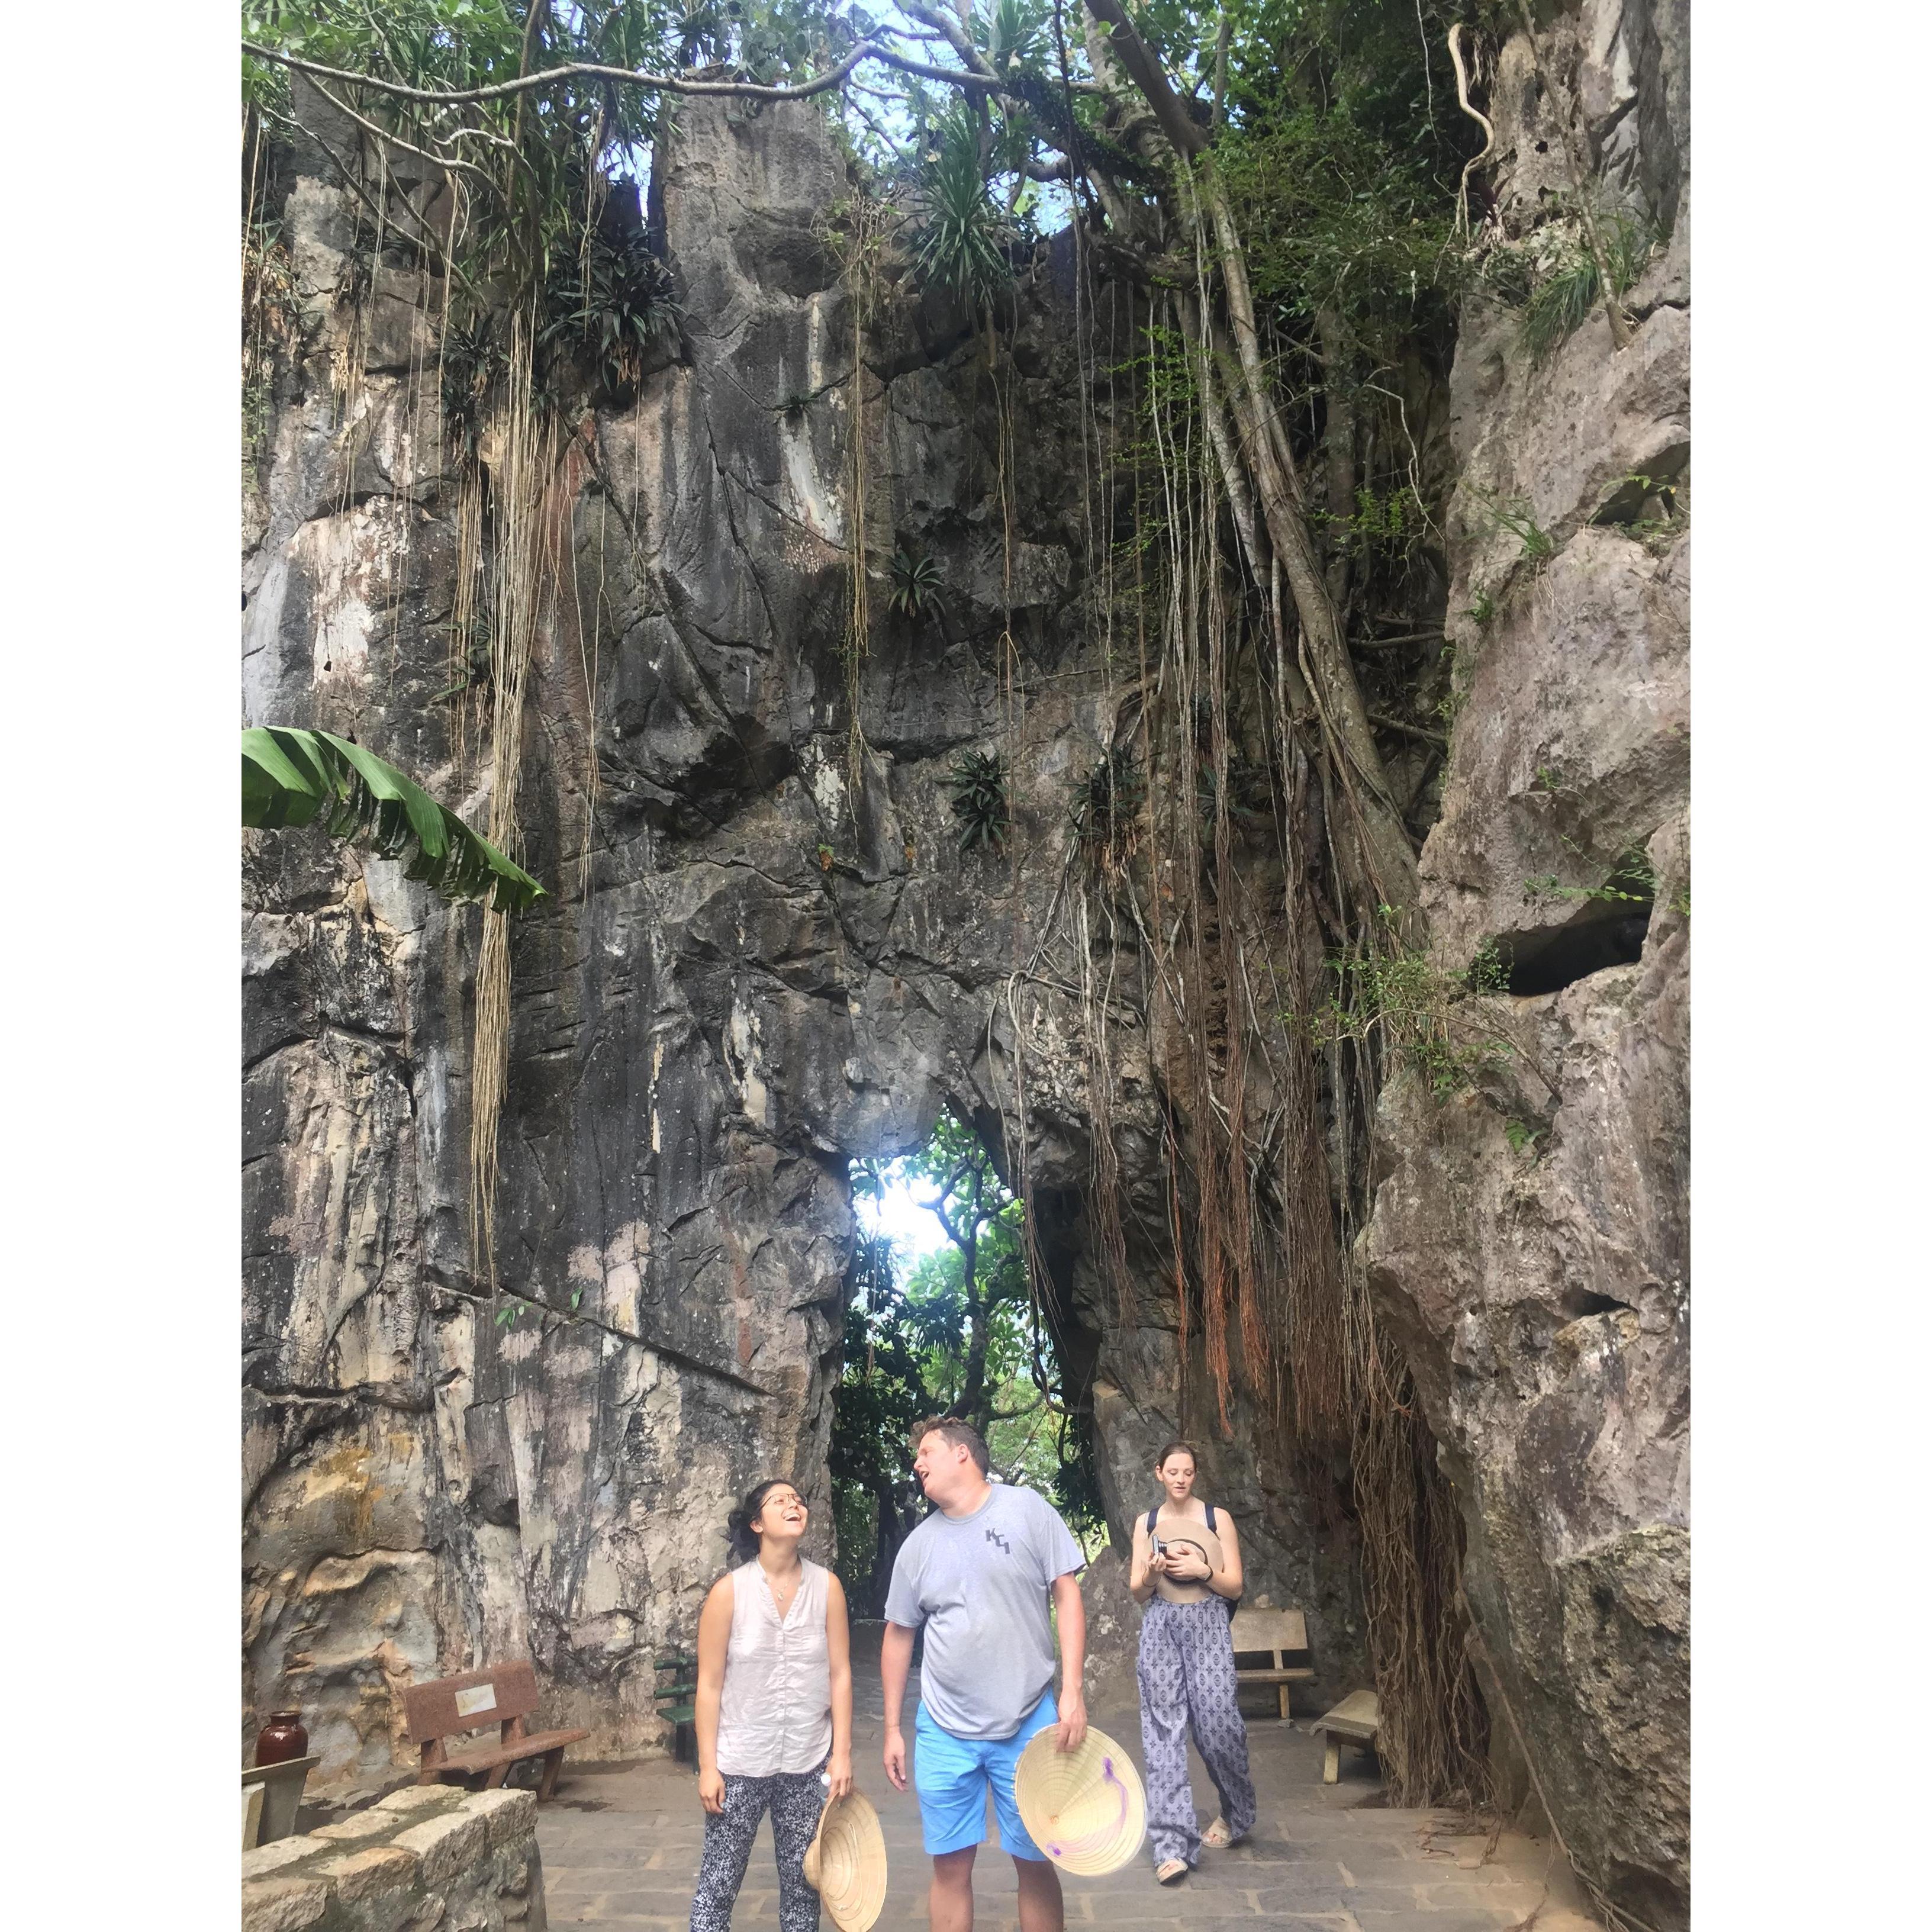 Valentina and Dewey sharing a moment on the marble mountains of Da Nang - Vietnam (Sept 2018)